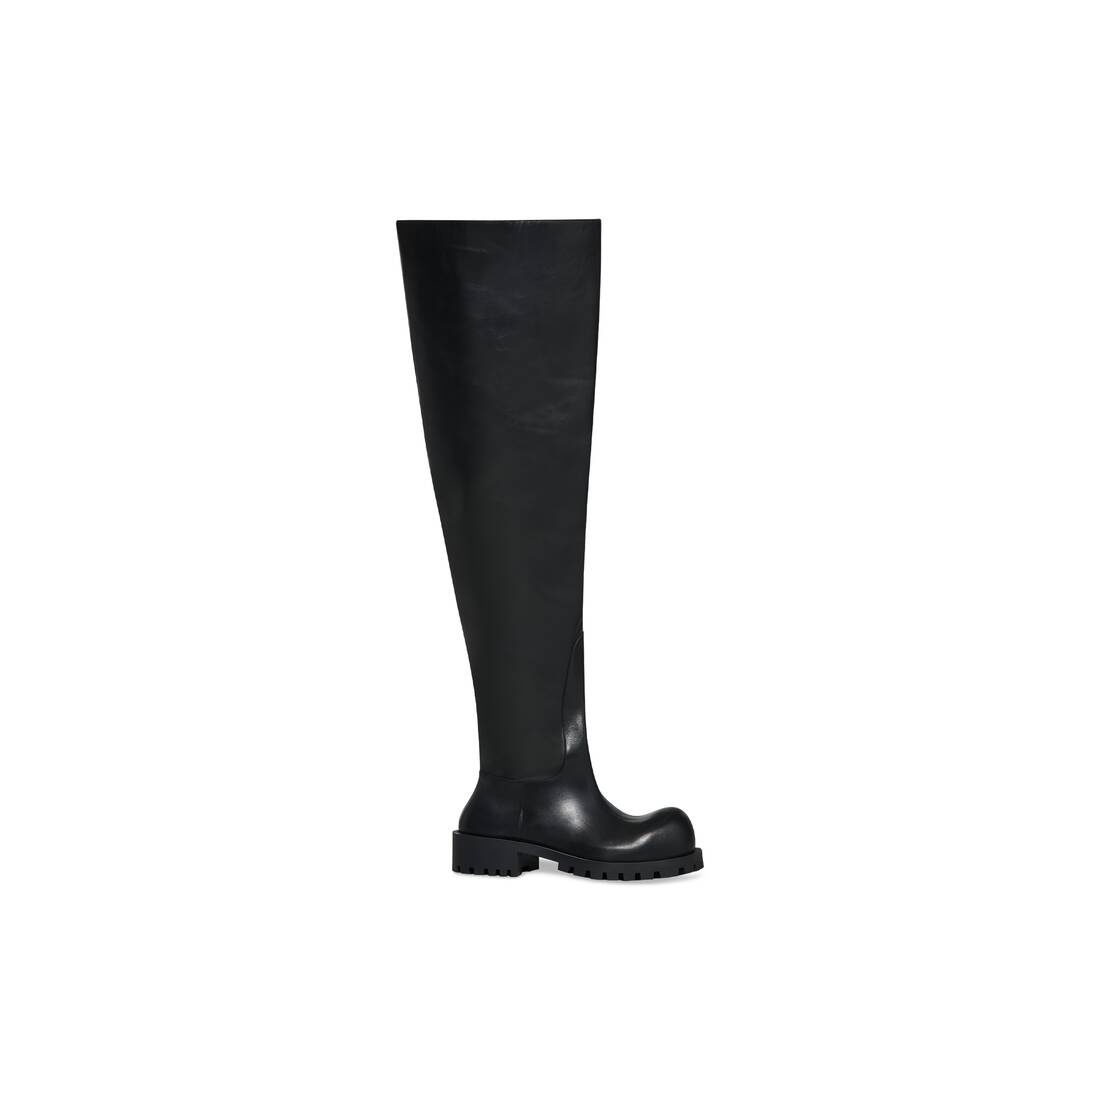 hummer over-the-knee boot - 1